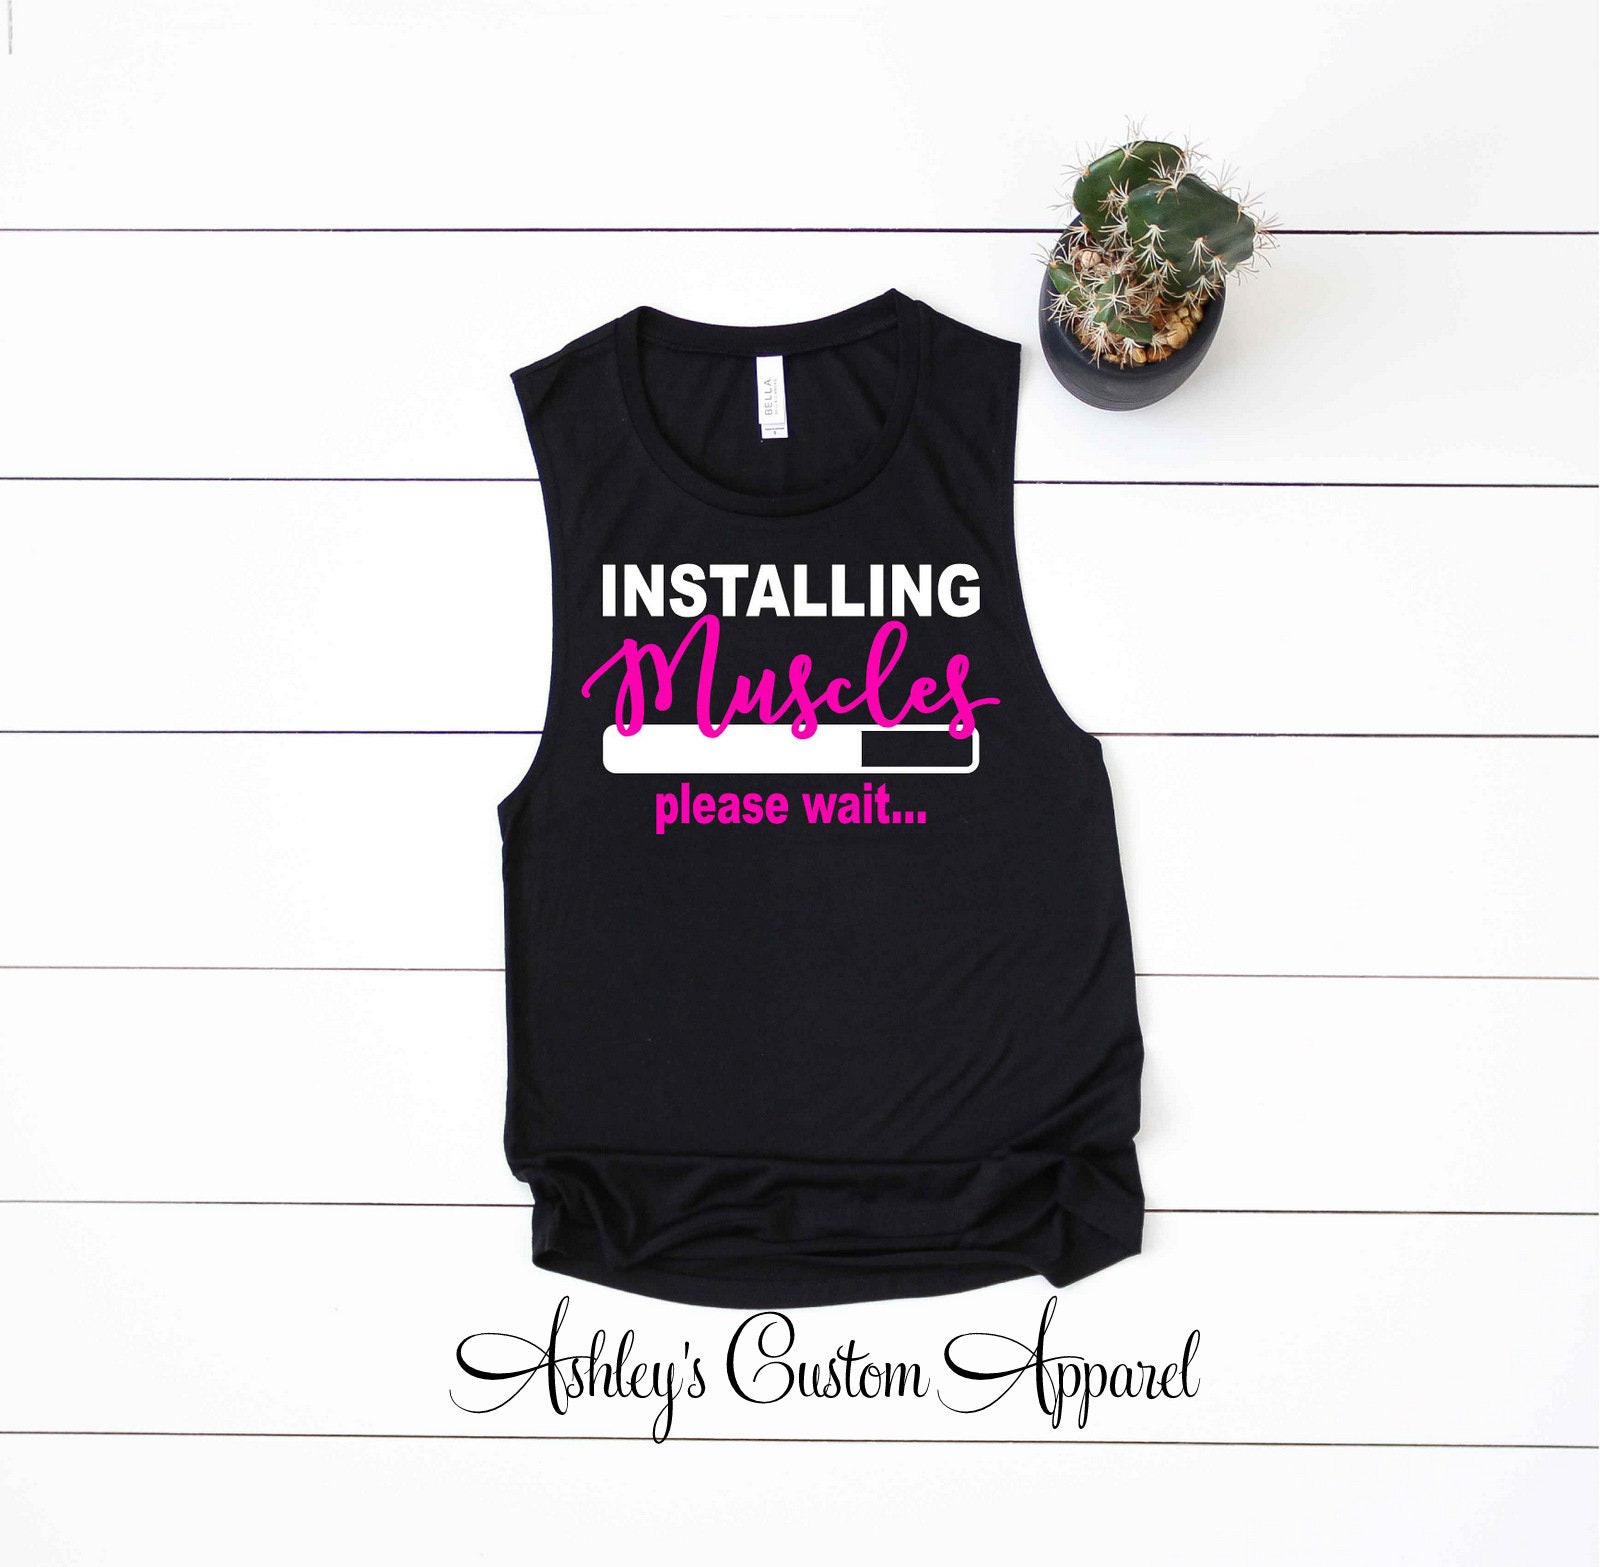 Funny Fitness Shirts, Inspirational Work Out Tanks, Womens Workout Shirts,  Installing Muscles, Motivational Fitness, Cute Gym Shirts, Gifts 